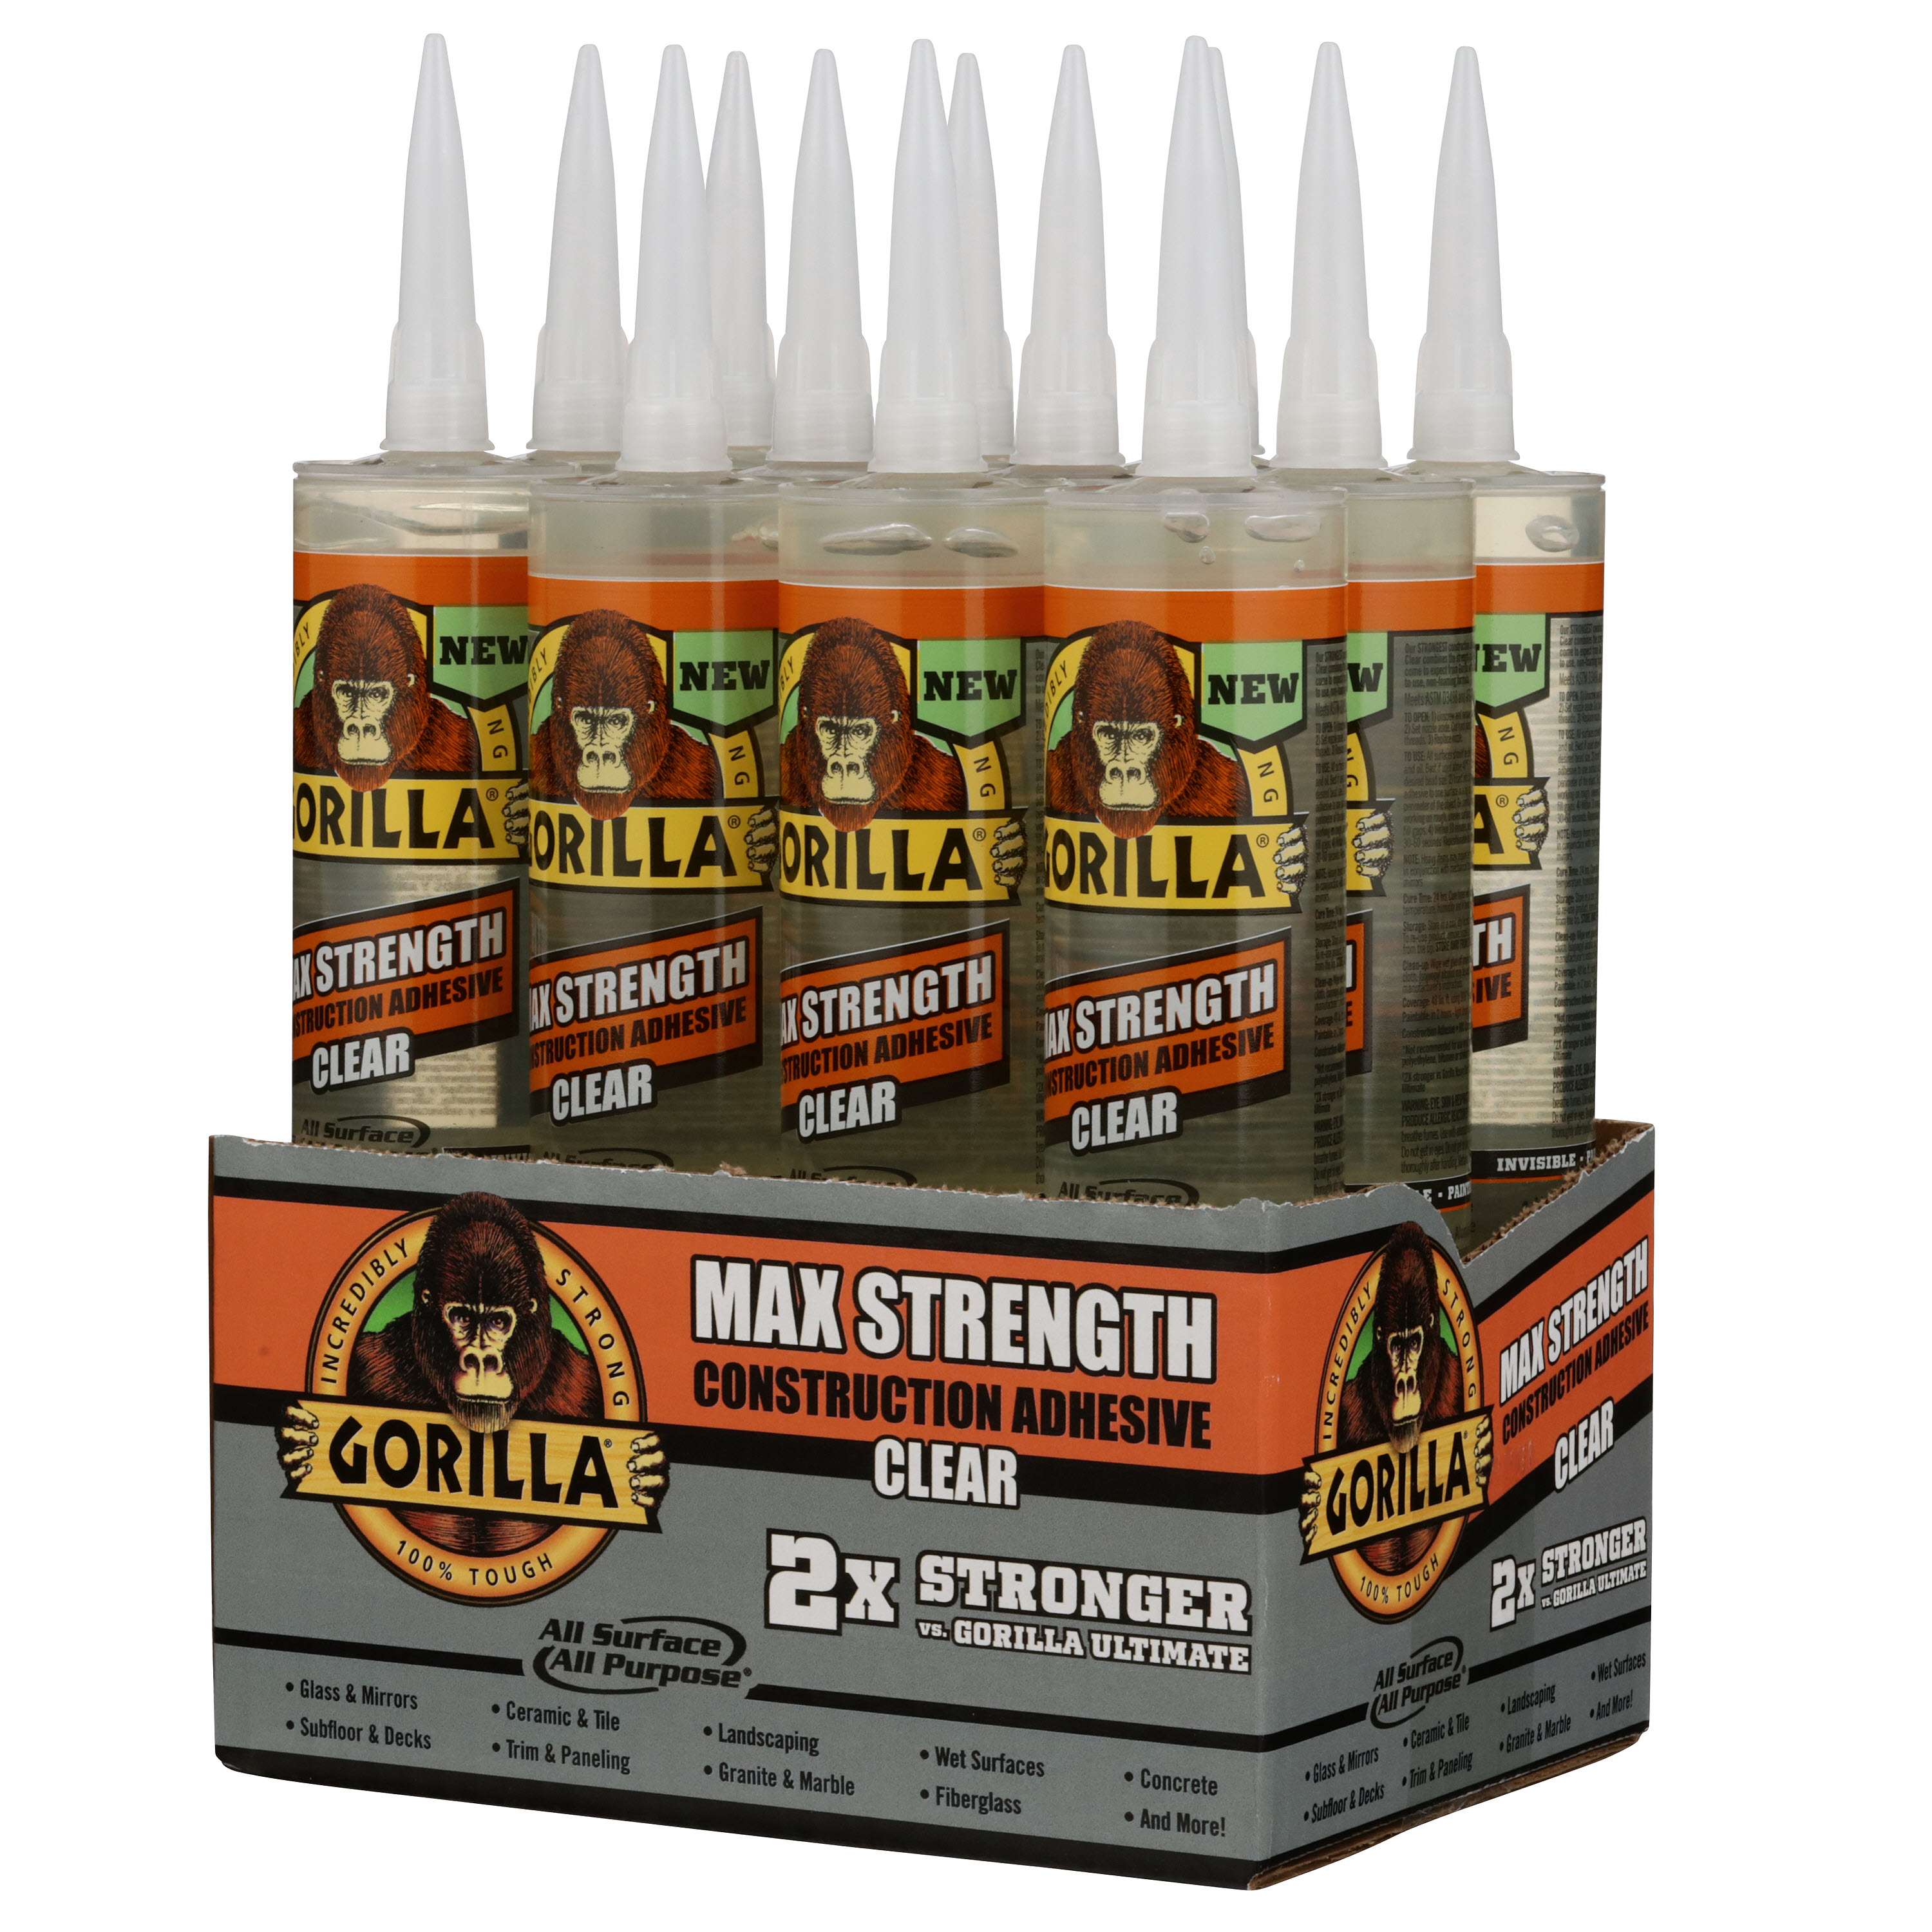 Gorilla Max Strength Clear Construction Adhesive, 9 Ounce Cartridge, Clear, (Pack of 12)